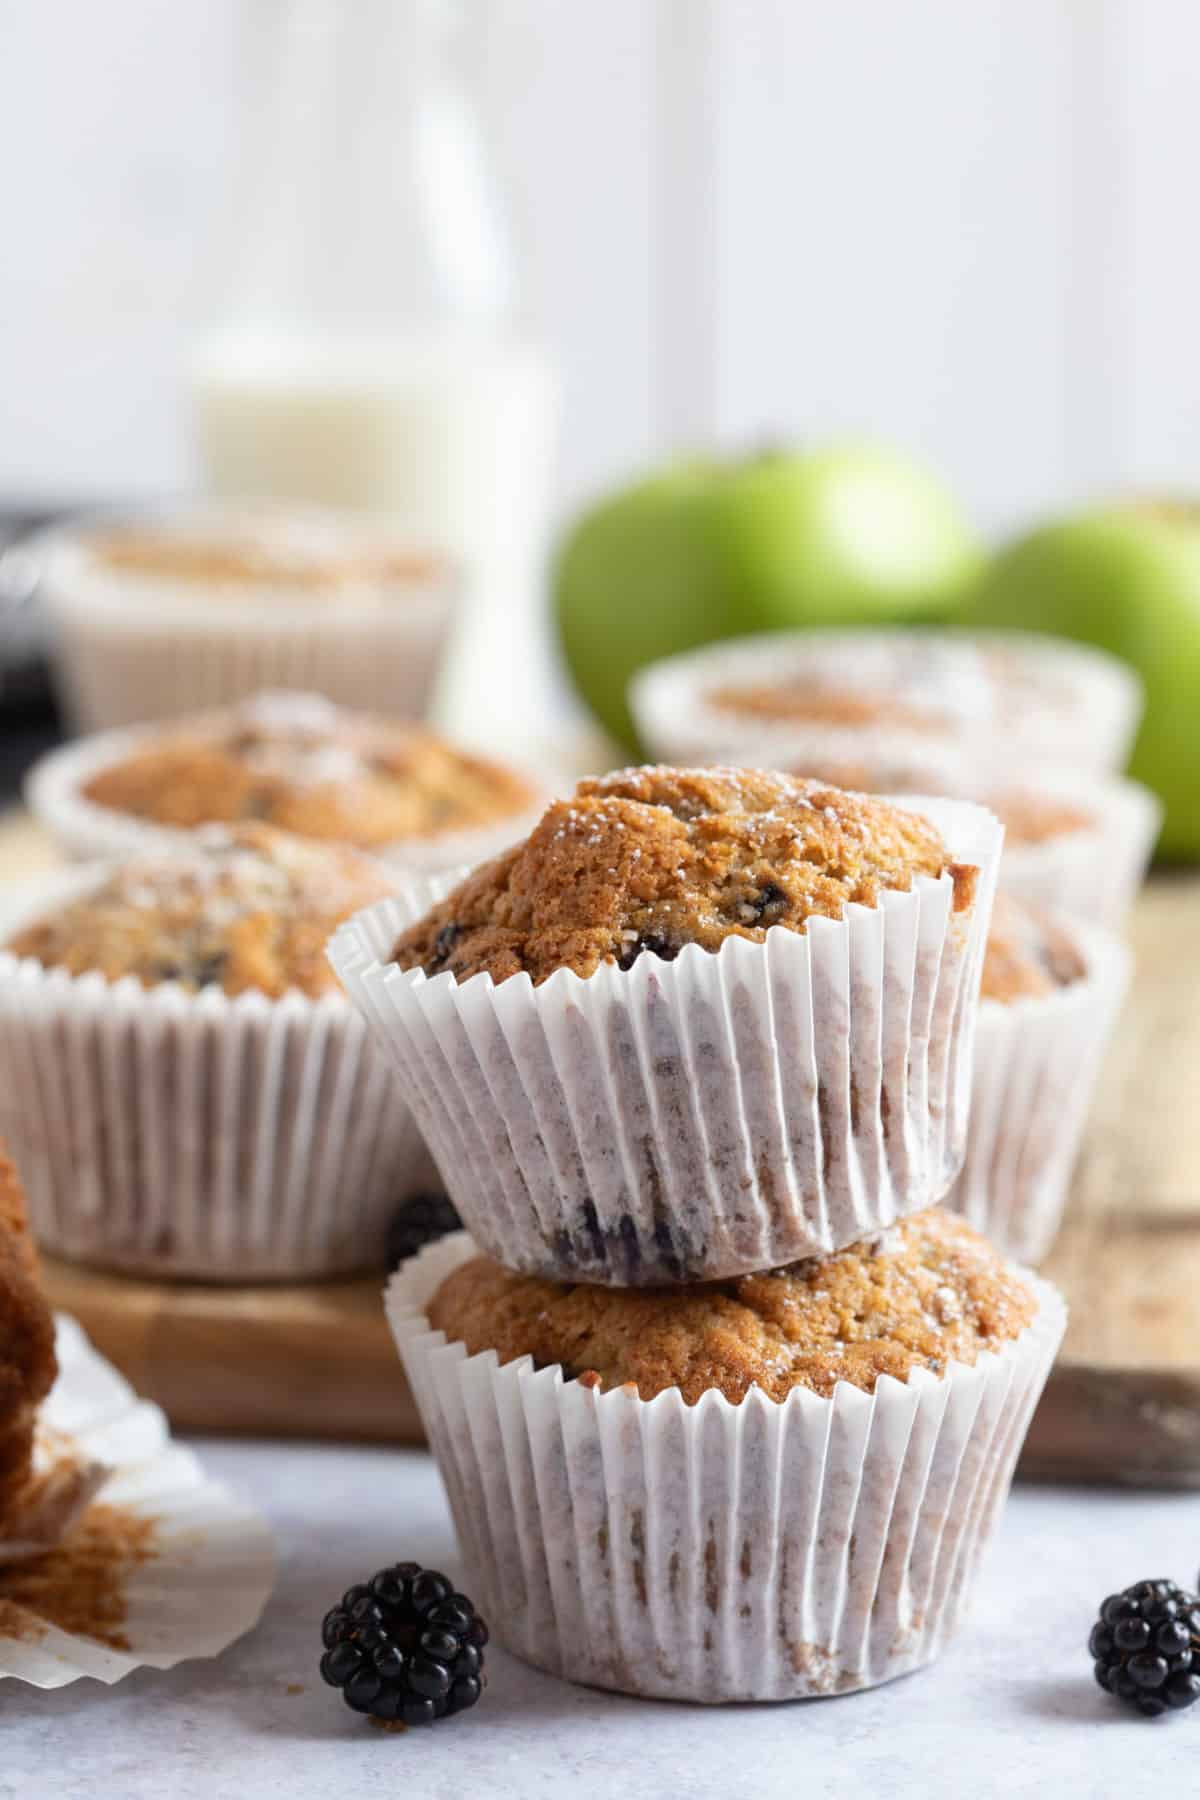 Two apple and blackberry muffins with a glass of milk.